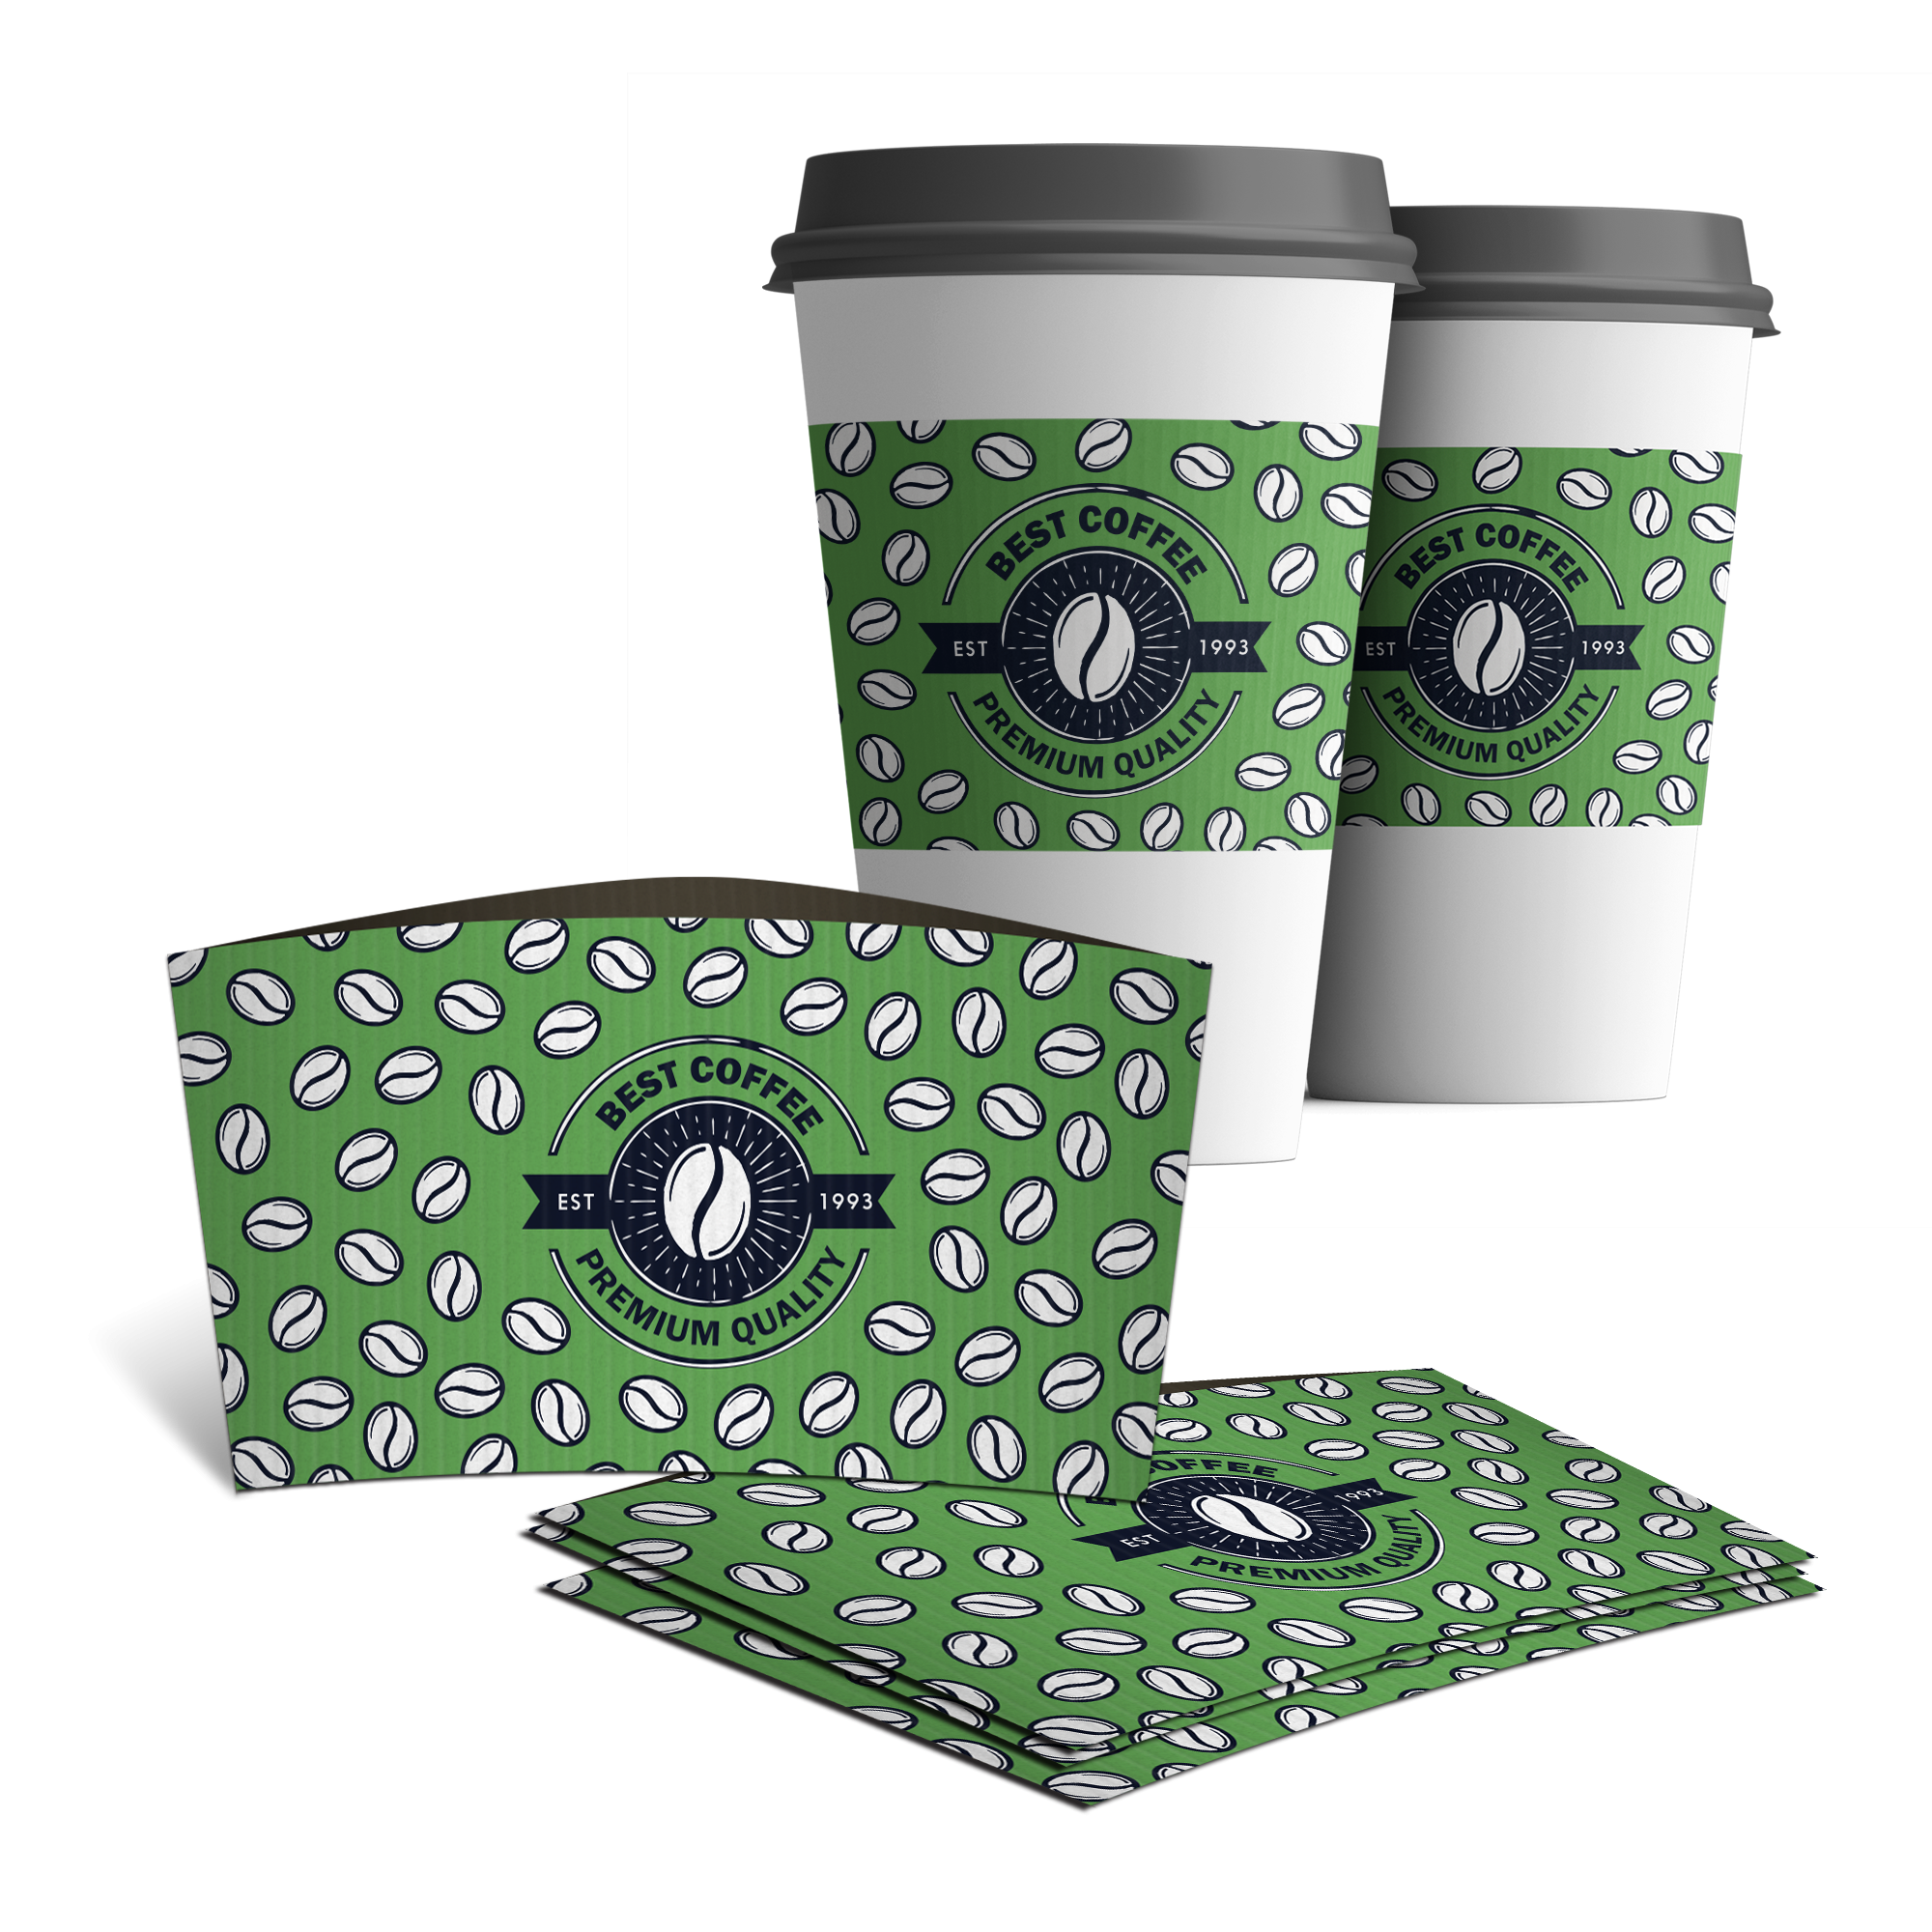 https://www.newprint.com/media/catalog/product/cache/26f5bafac606348c5bc681fa7bf80782/c/o/coffee_cup_sleeve_product_image_2_1.png